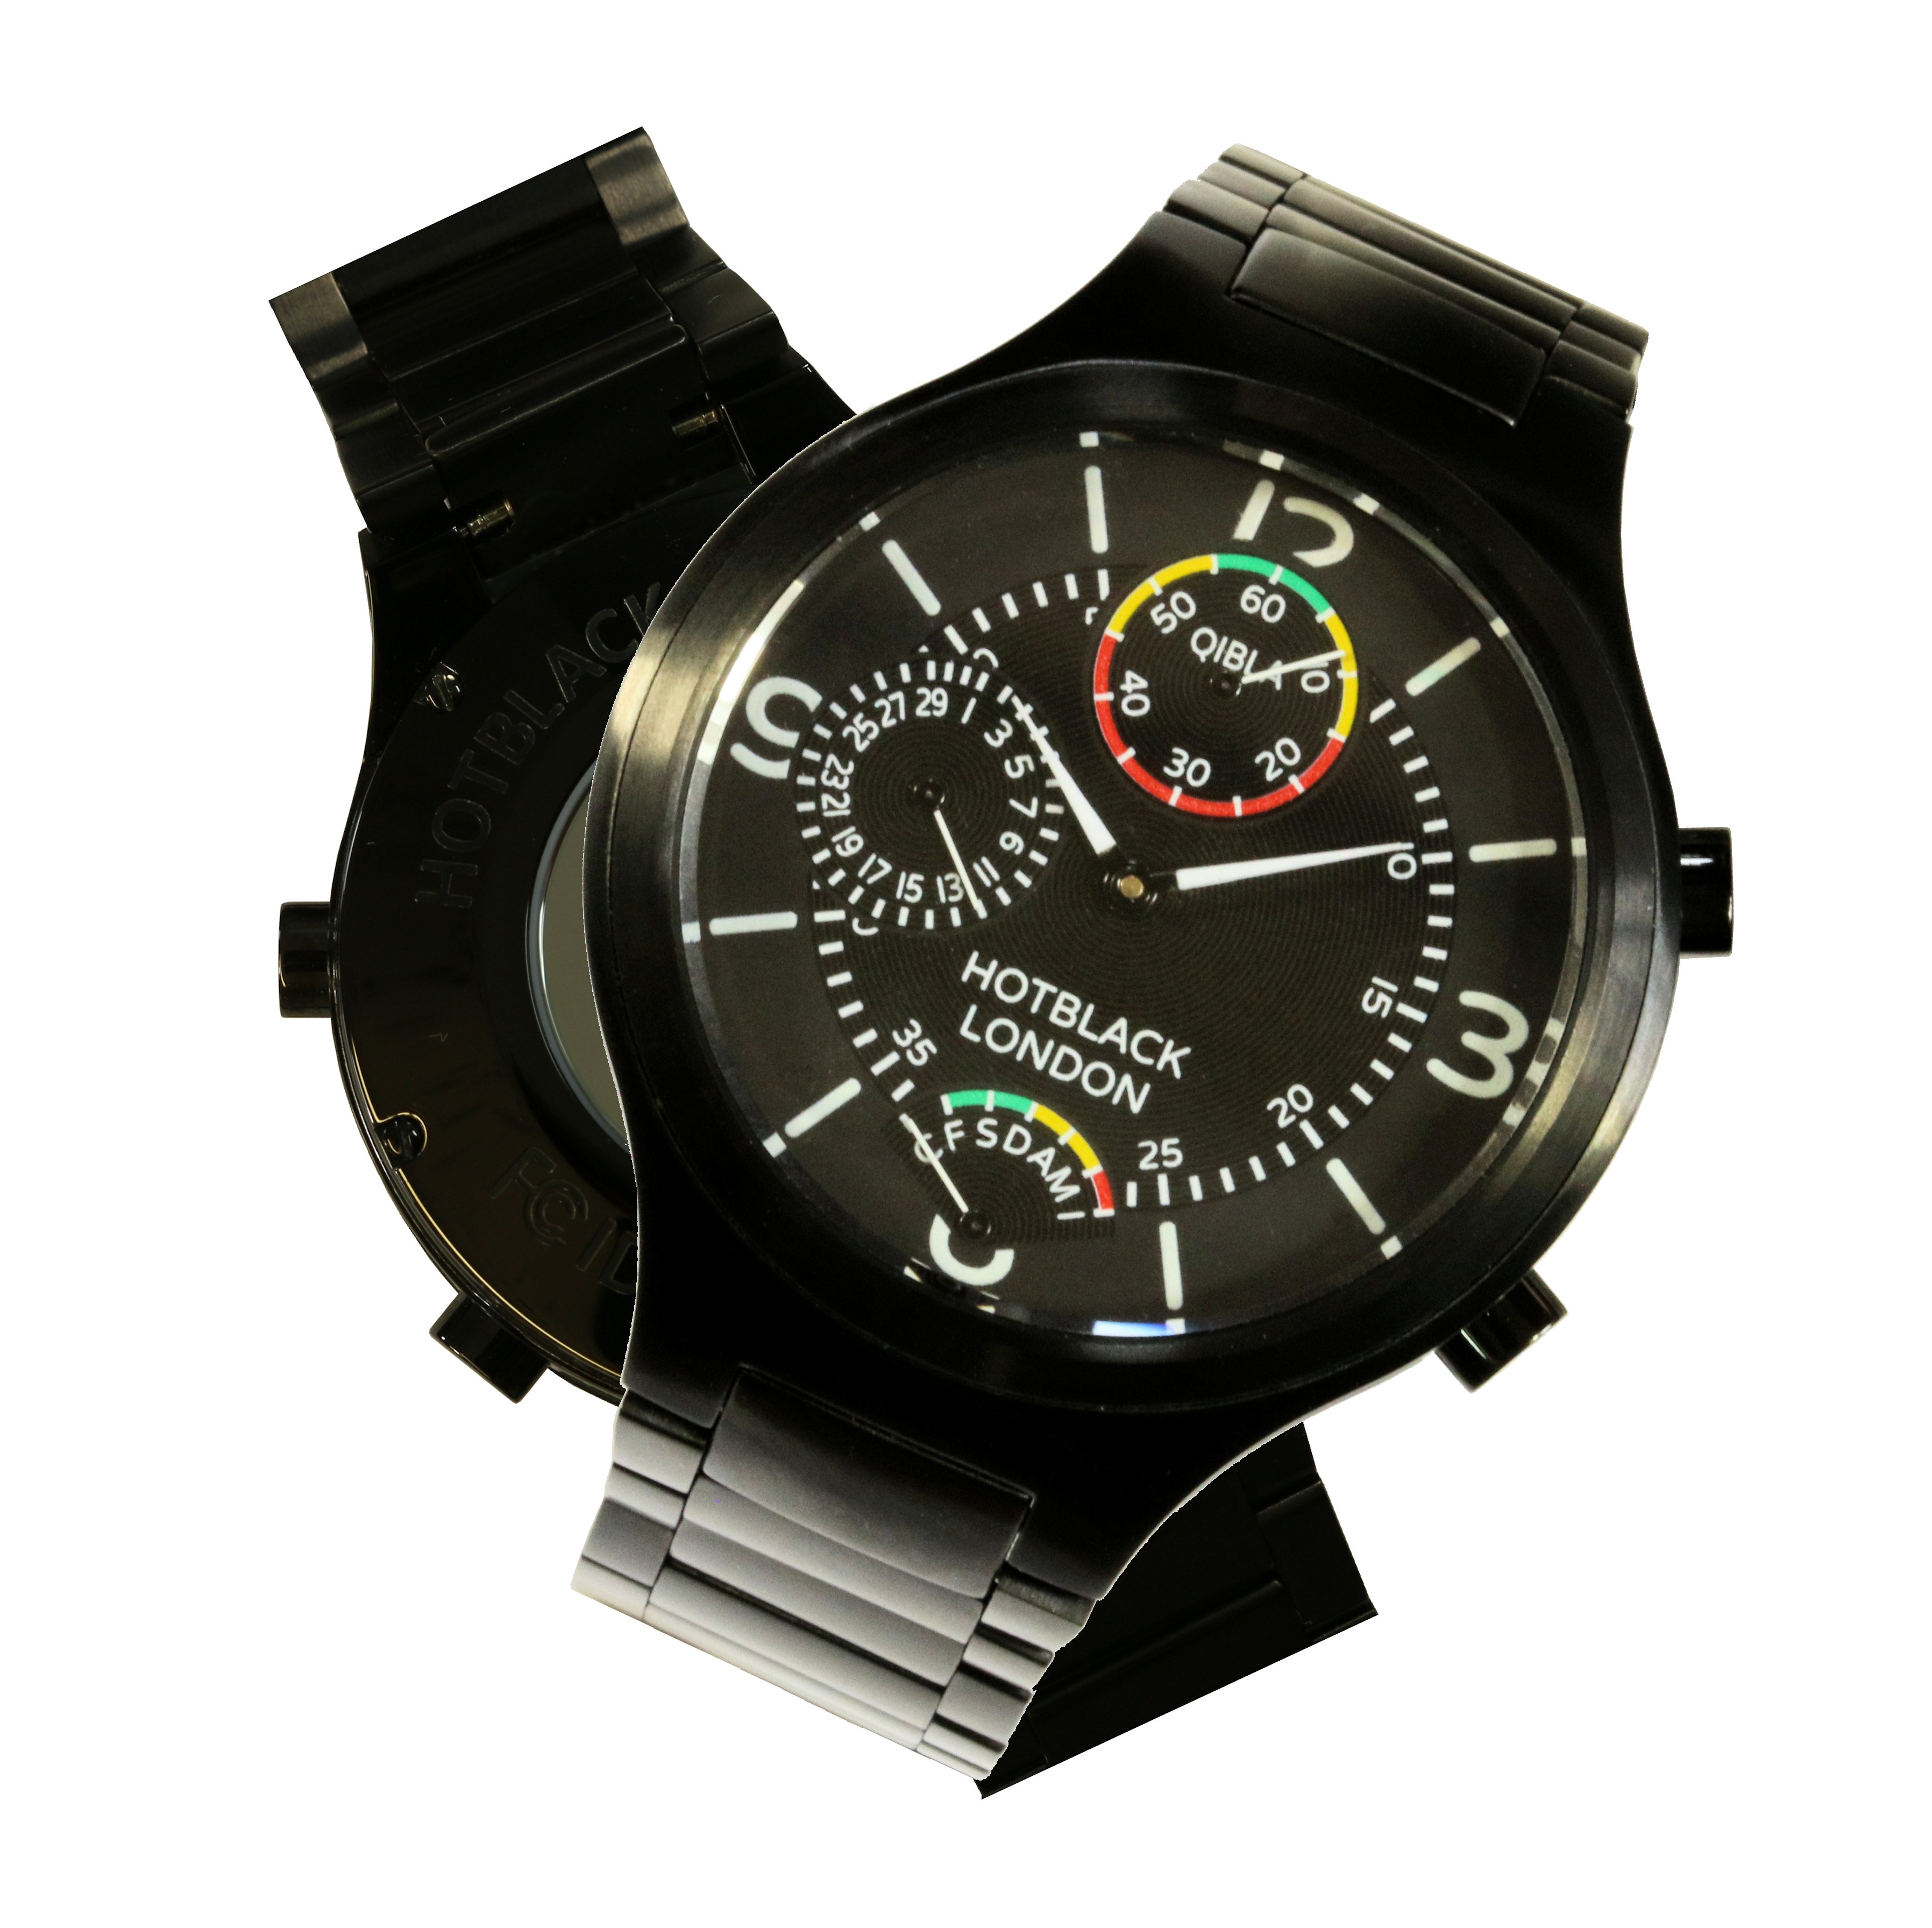 Presenting the Hotblack Calibre watch created by Richard Hoptroff